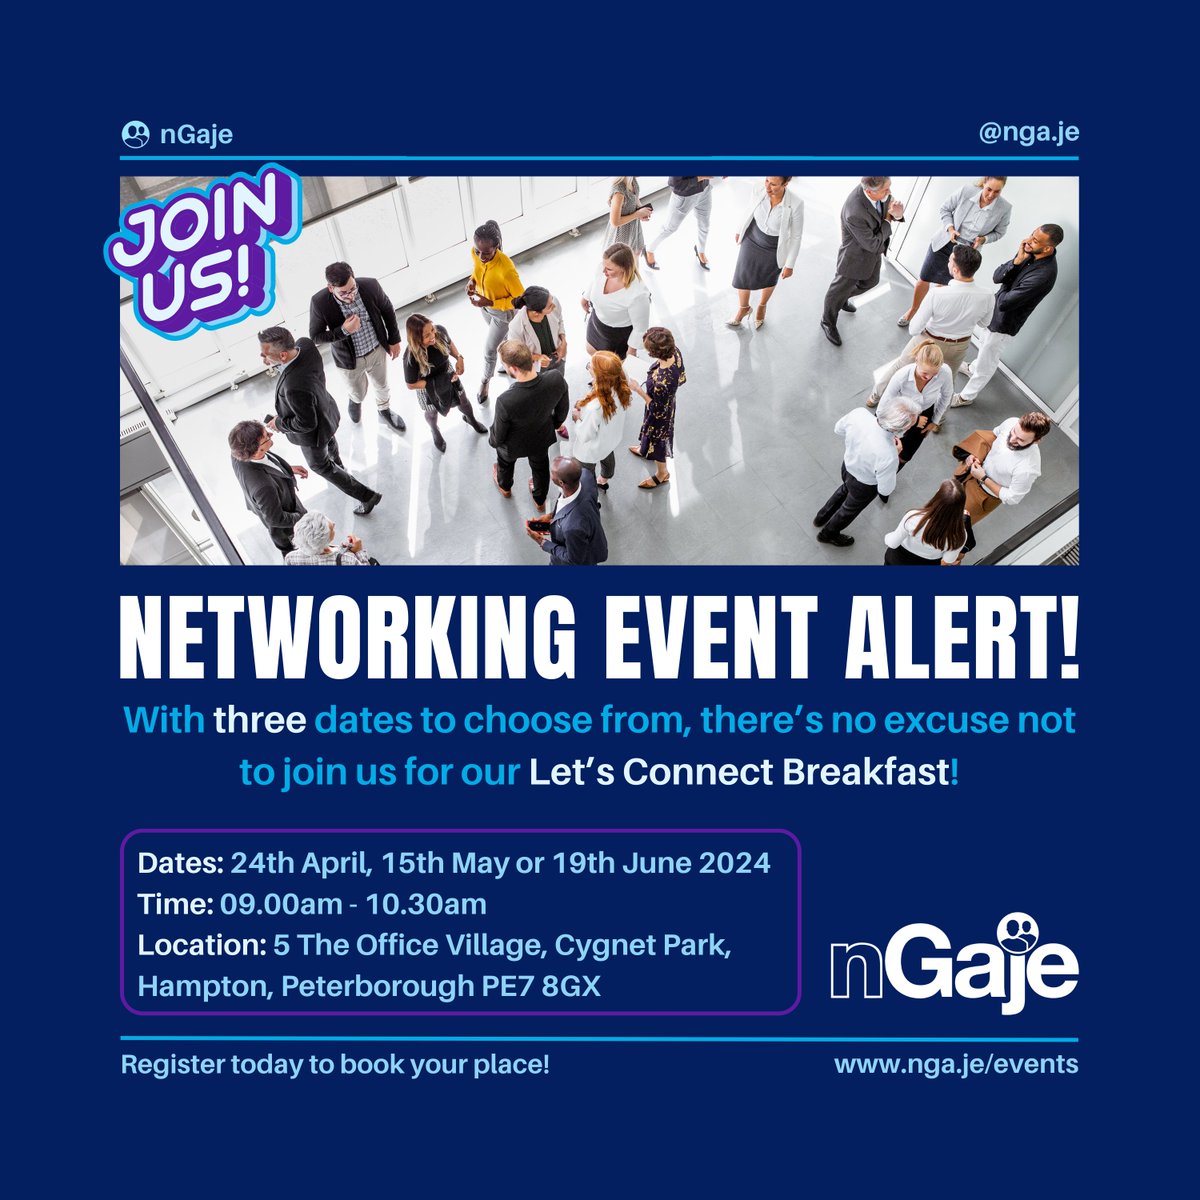 Our Let's Connect Breakfast Networking Event is taking place in April, May AND June! Check out the dates below and then click nga.je/events to register. #ngaje #networkingevent #breakfastmeeting #connectwithus #employeeengagement